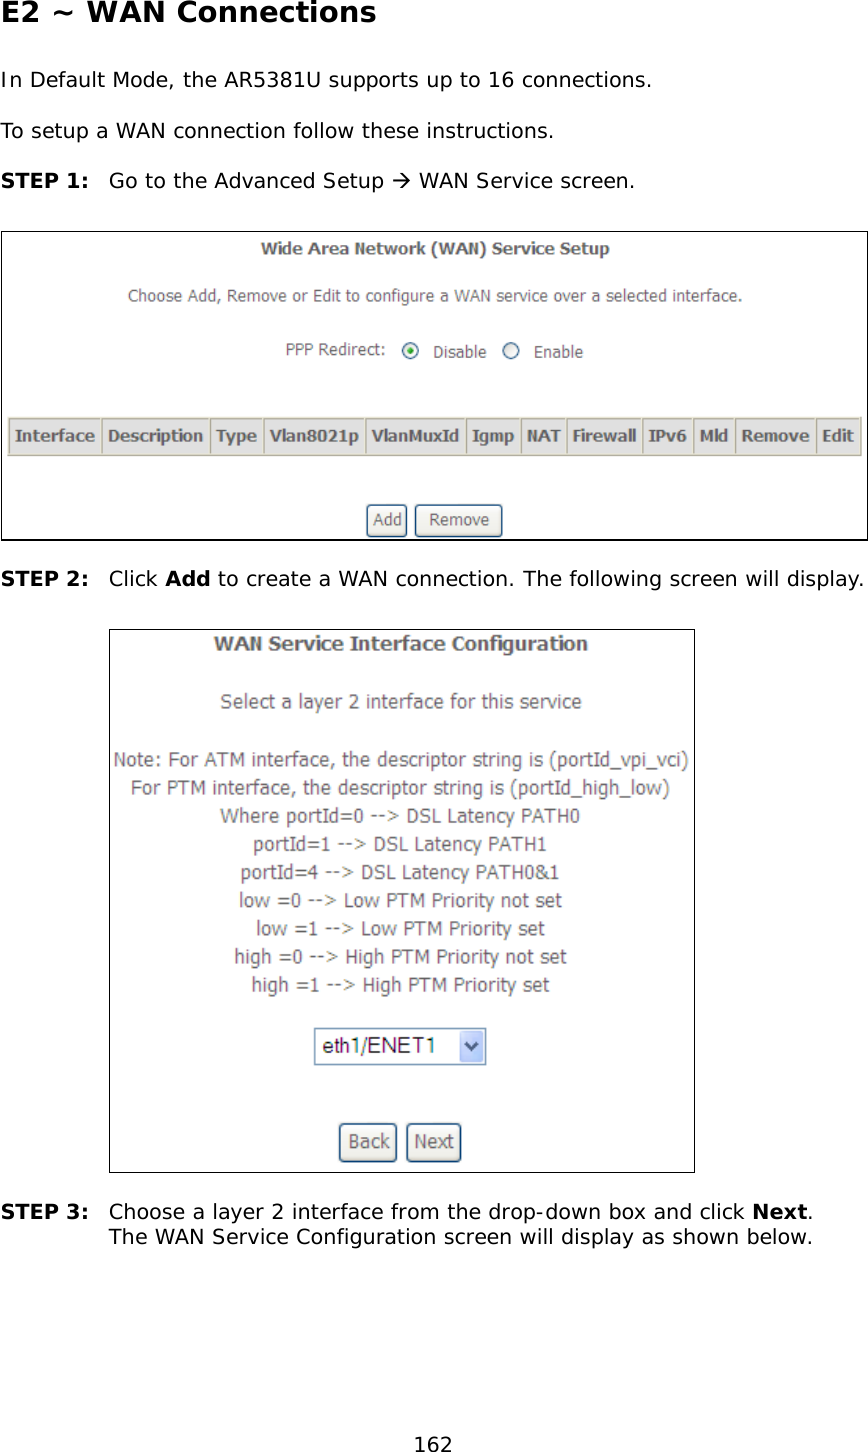  162 E2 ~ WAN Connections In Default Mode, the AR5381U supports up to 16 connections.  To setup a WAN connection follow these instructions.  STEP 1:  Go to the Advanced Setup  WAN Service screen.   STEP 2:  Click Add to create a WAN connection. The following screen will display.    STEP 3:  Choose a layer 2 interface from the drop-down box and click Next.  The WAN Service Configuration screen will display as shown below.   